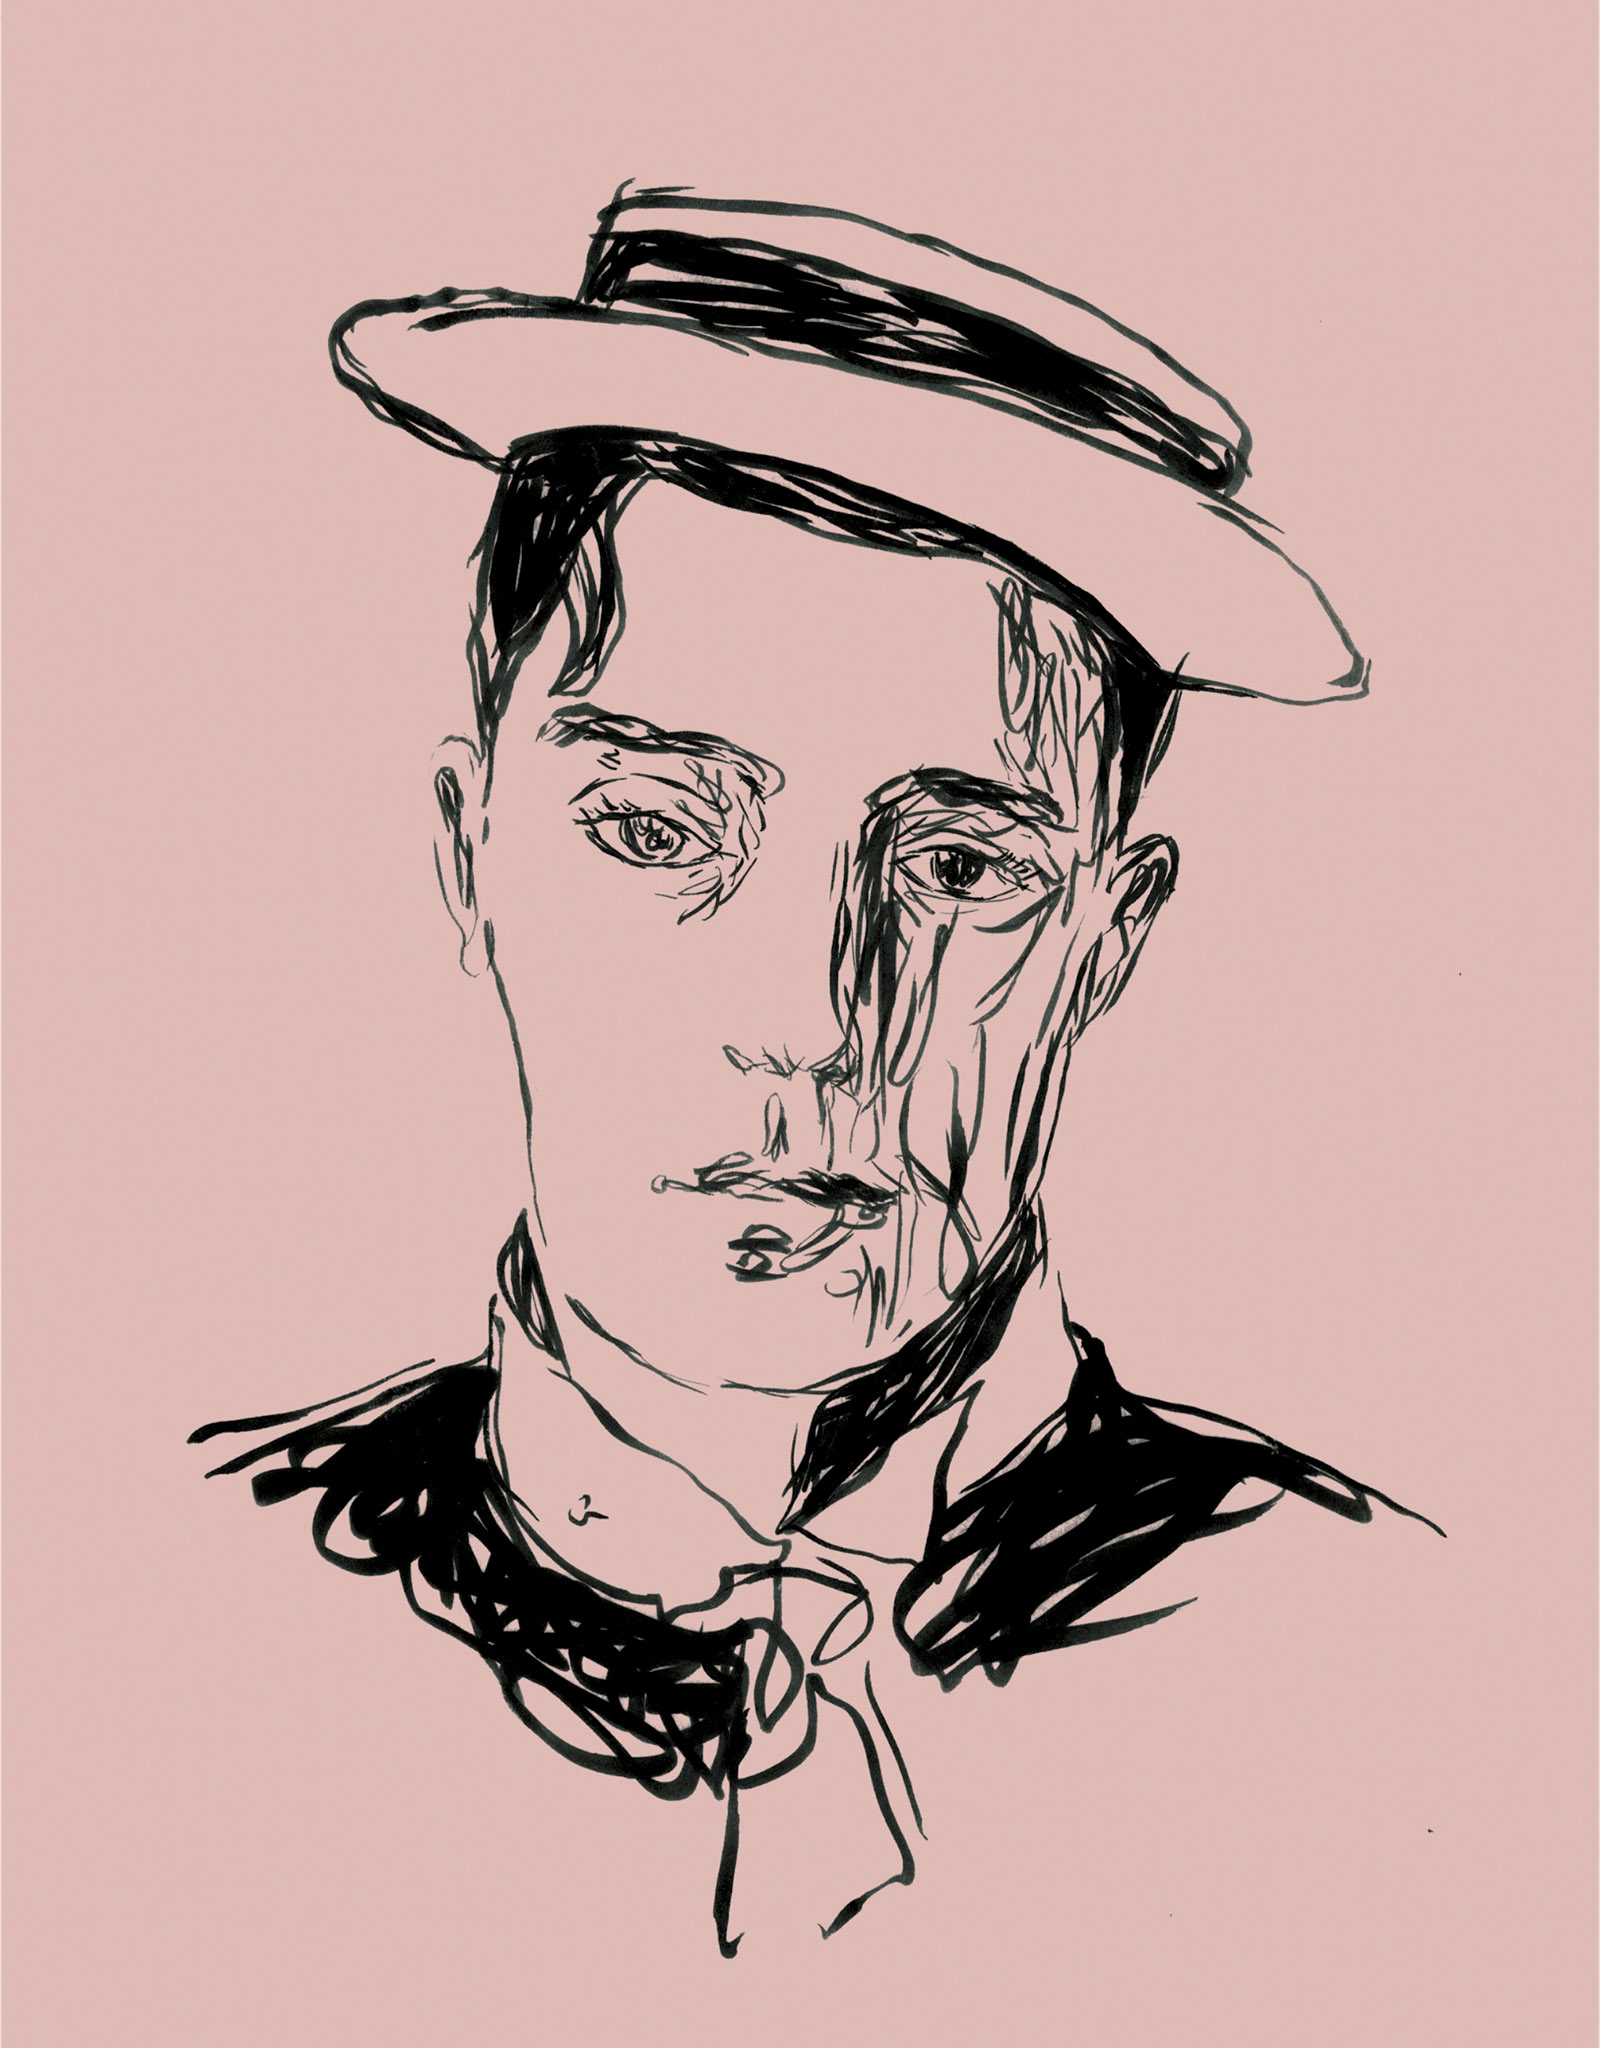 Review: Two New Biographies of Buster Keaton - The New York Times